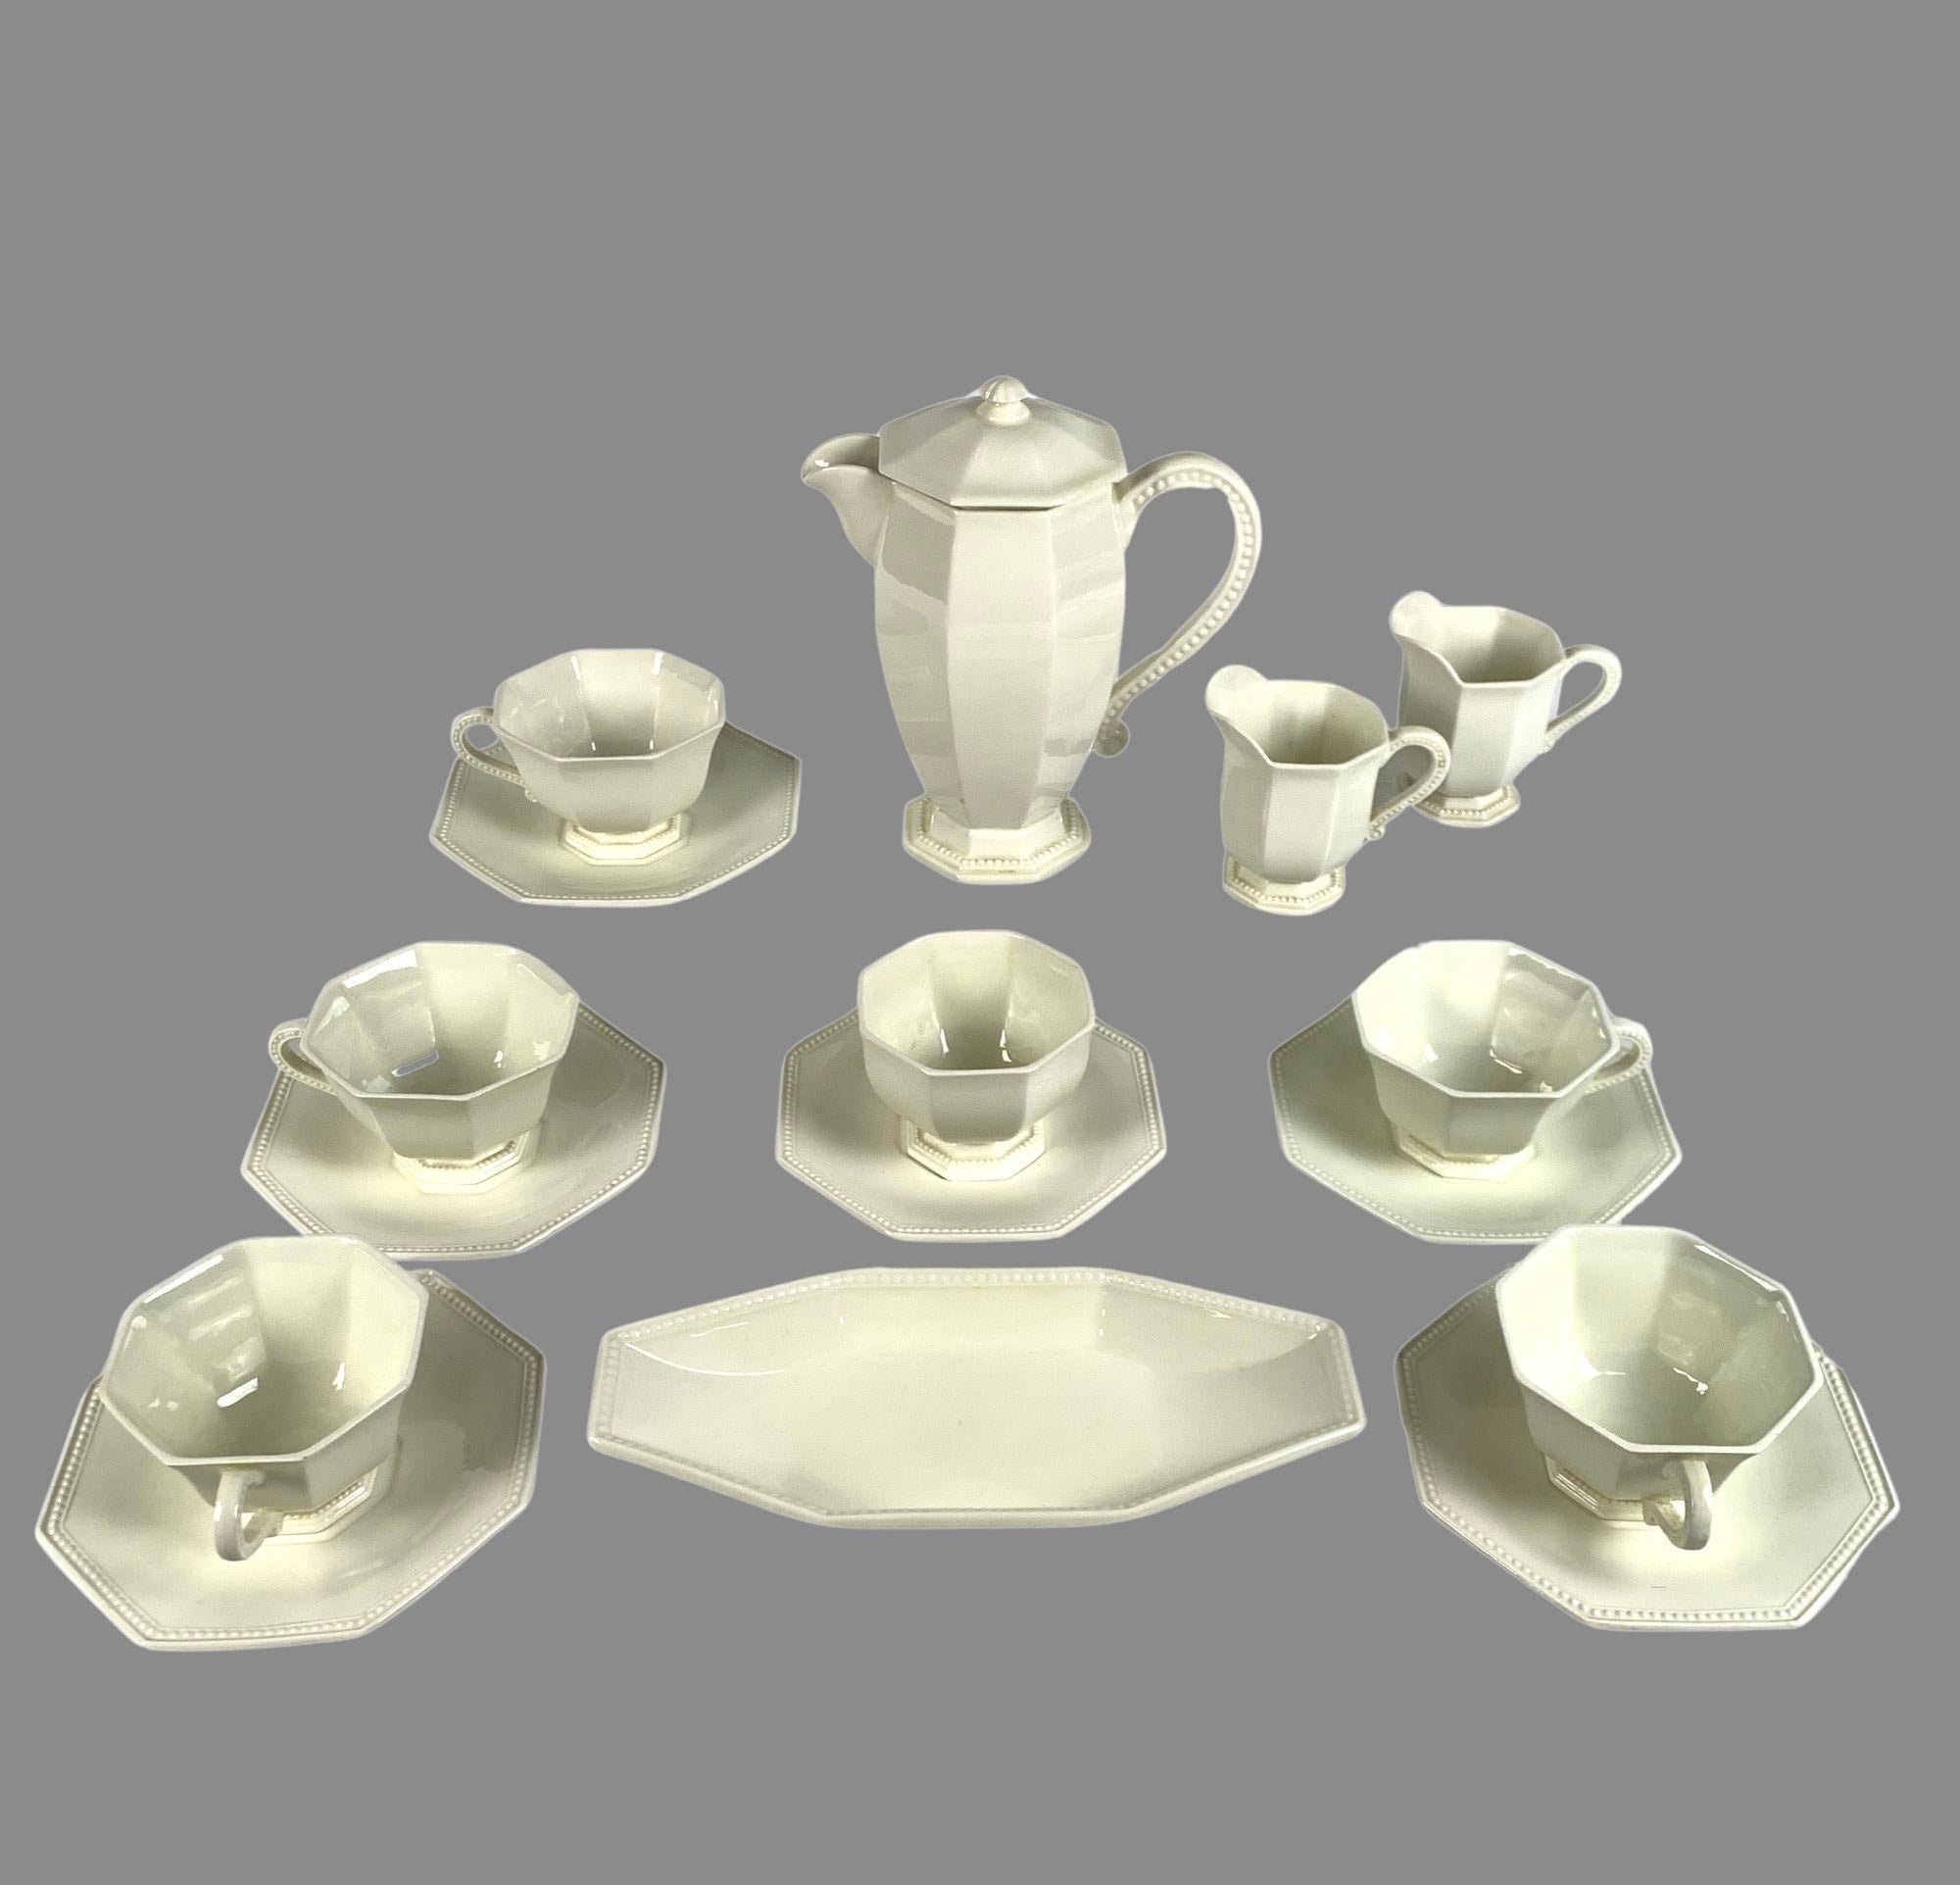 This exquisite French creamware breakfast set comprises five large breakfast cups, an open sucrier with its stand, a coffee pot, two creamers, and a long dish for biscuits or rolls.
Each piece in the set has an elegant octagonal design with a raised